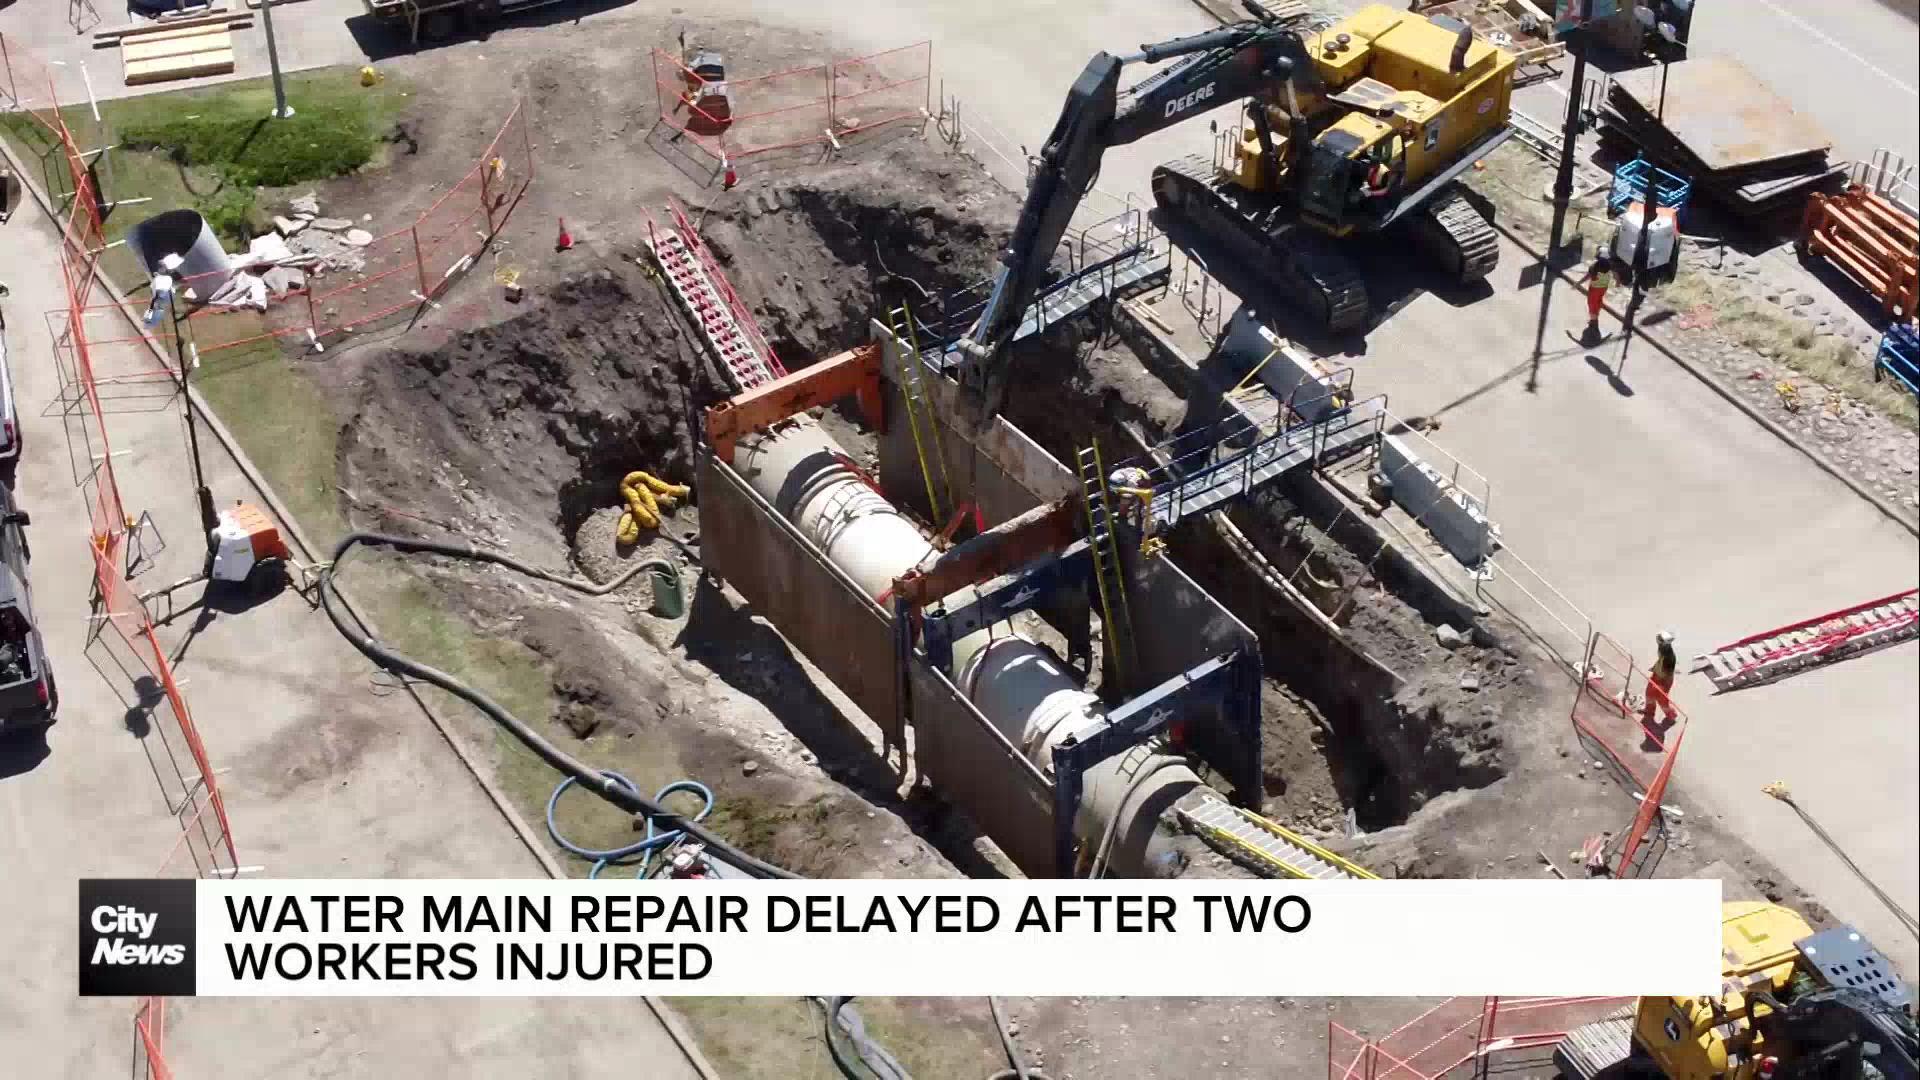 Water main repair delayed after two workers injured